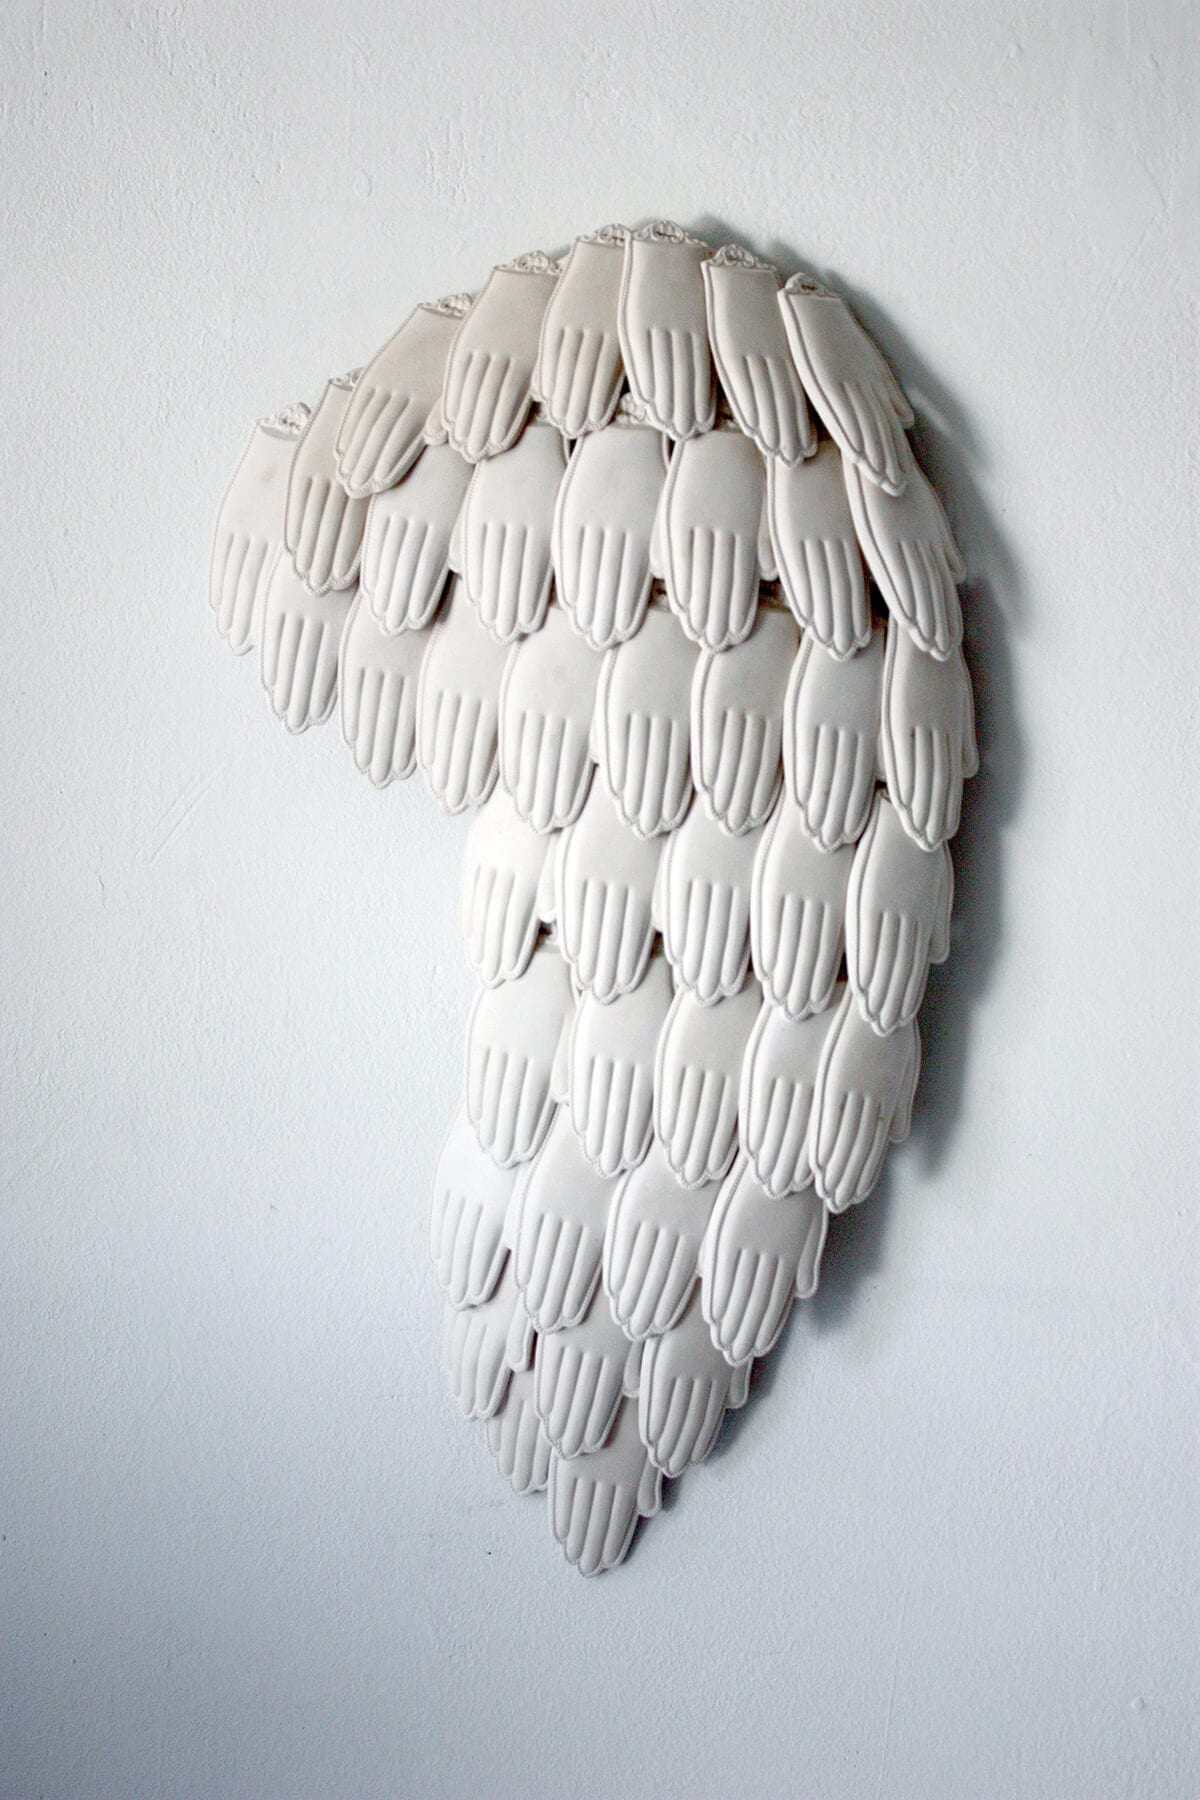 Wing of exvotes, 2009